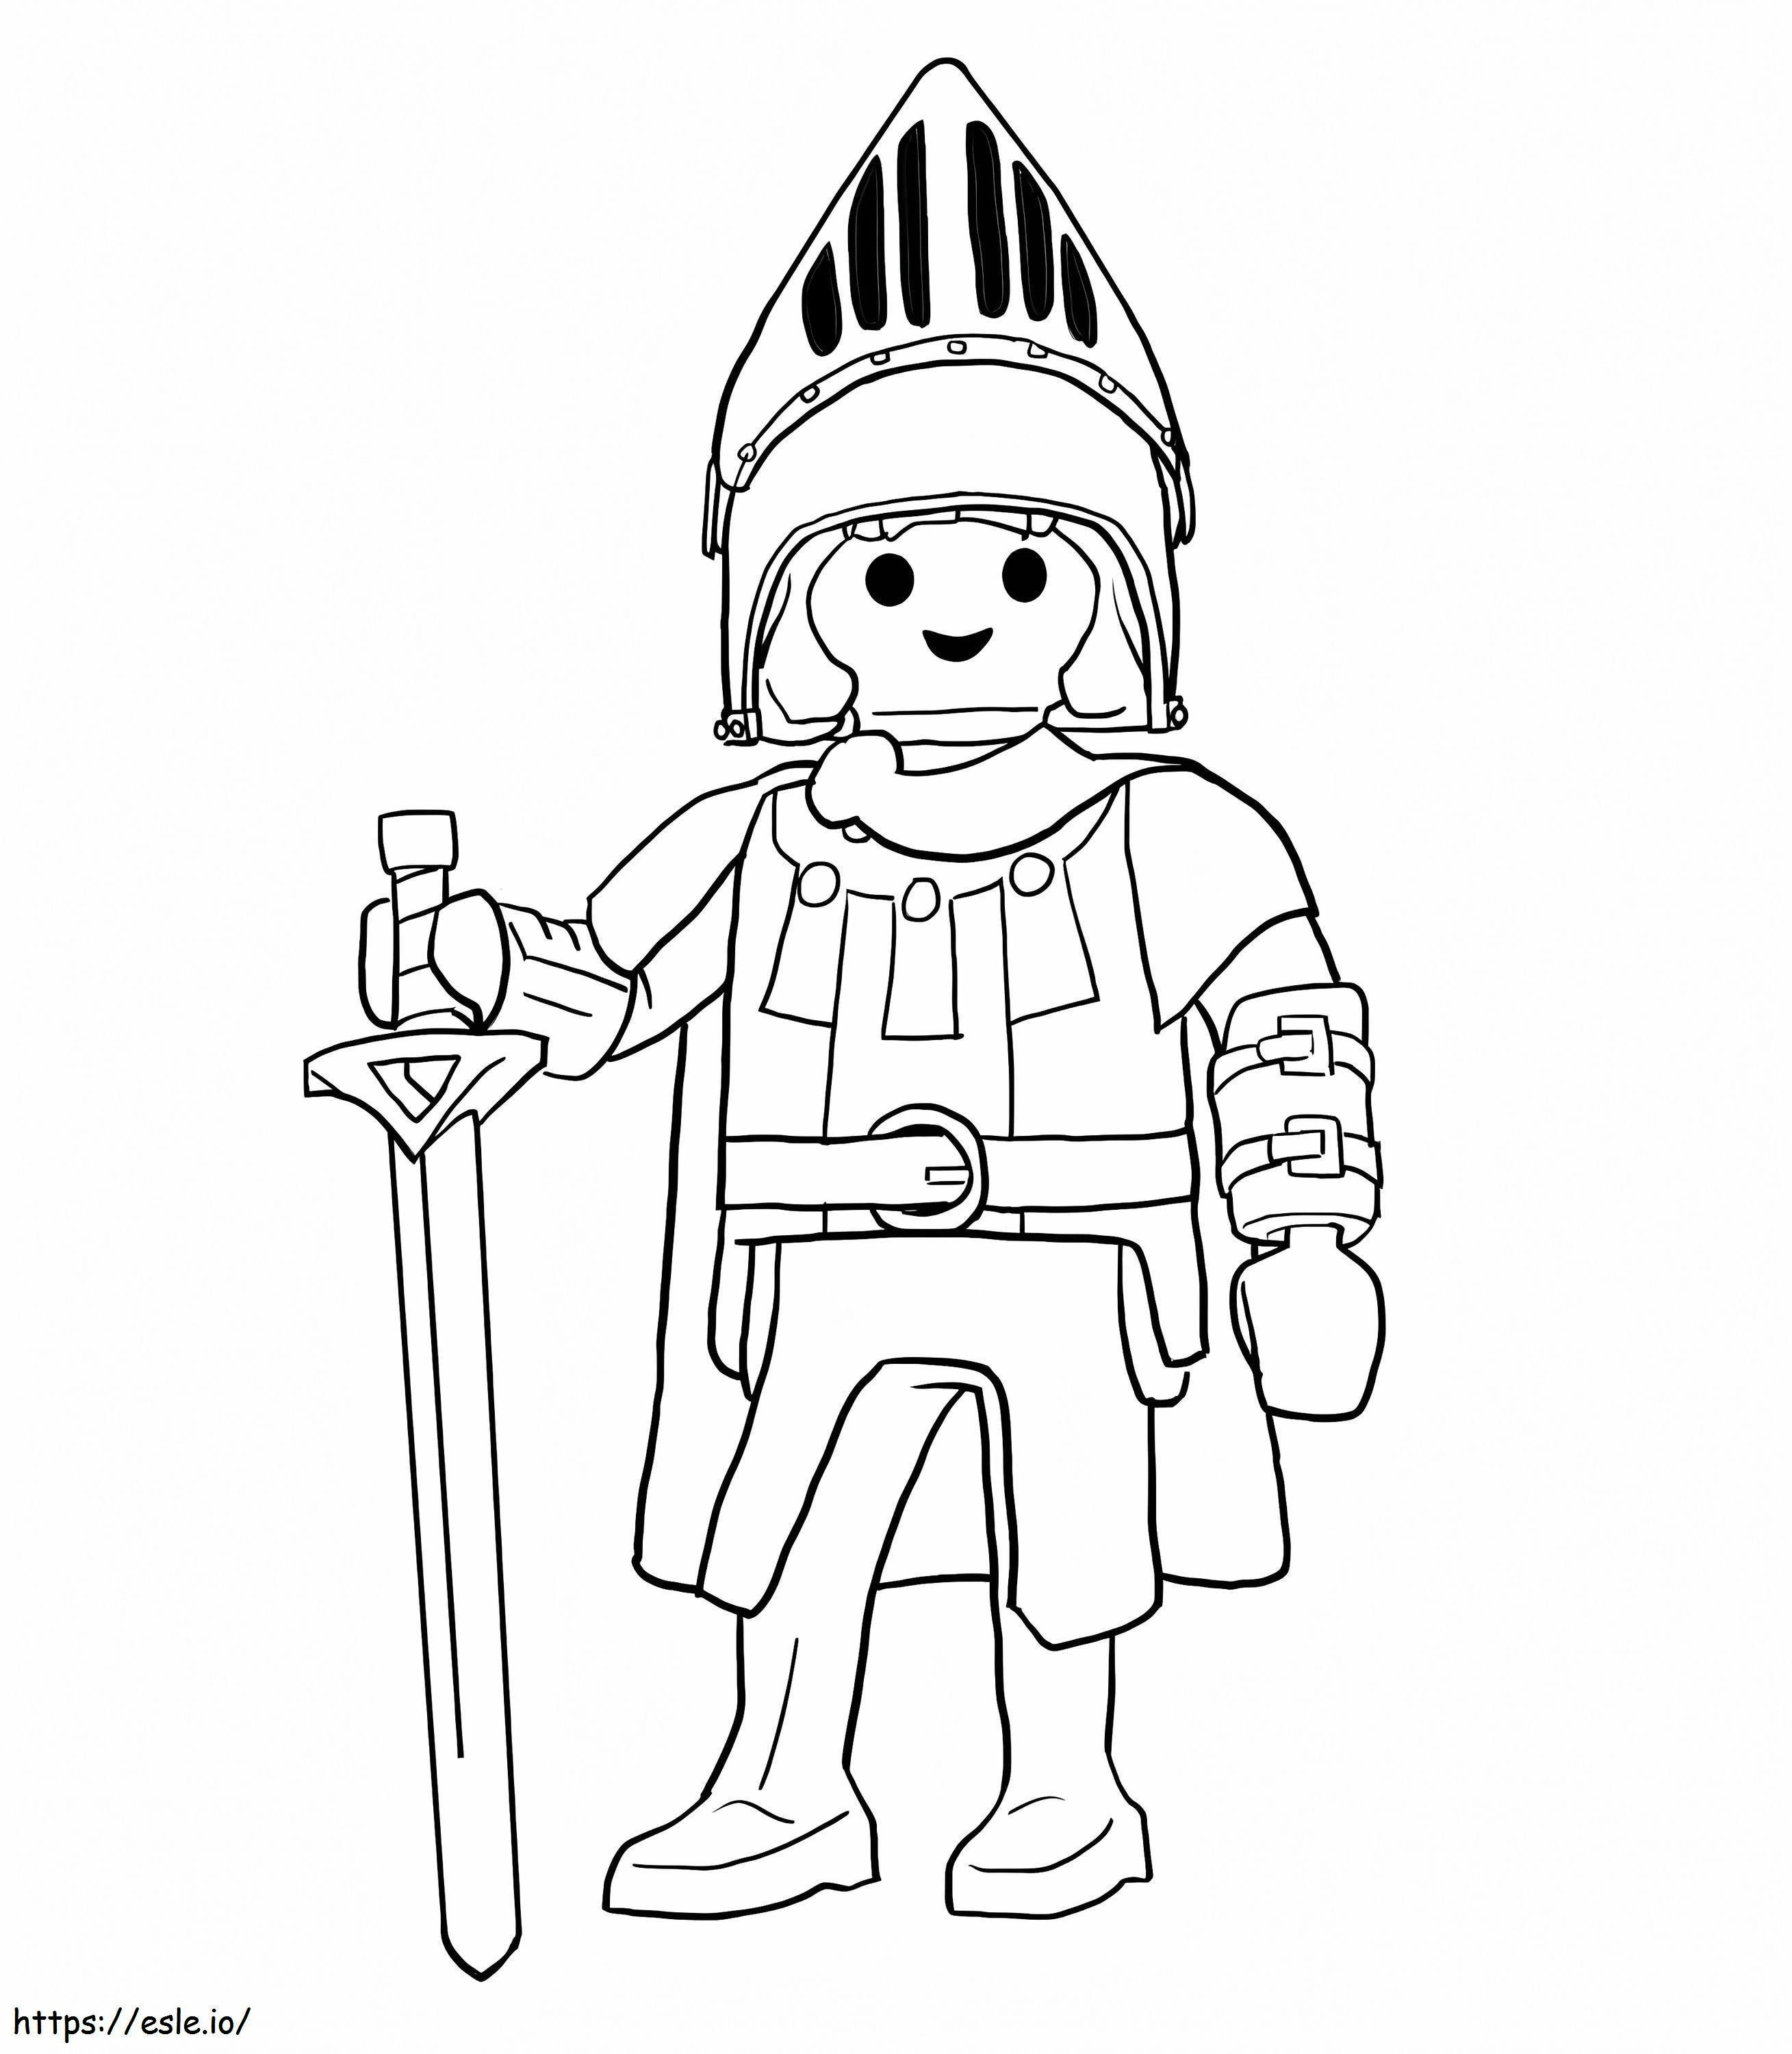 Knight Playmobil coloring page